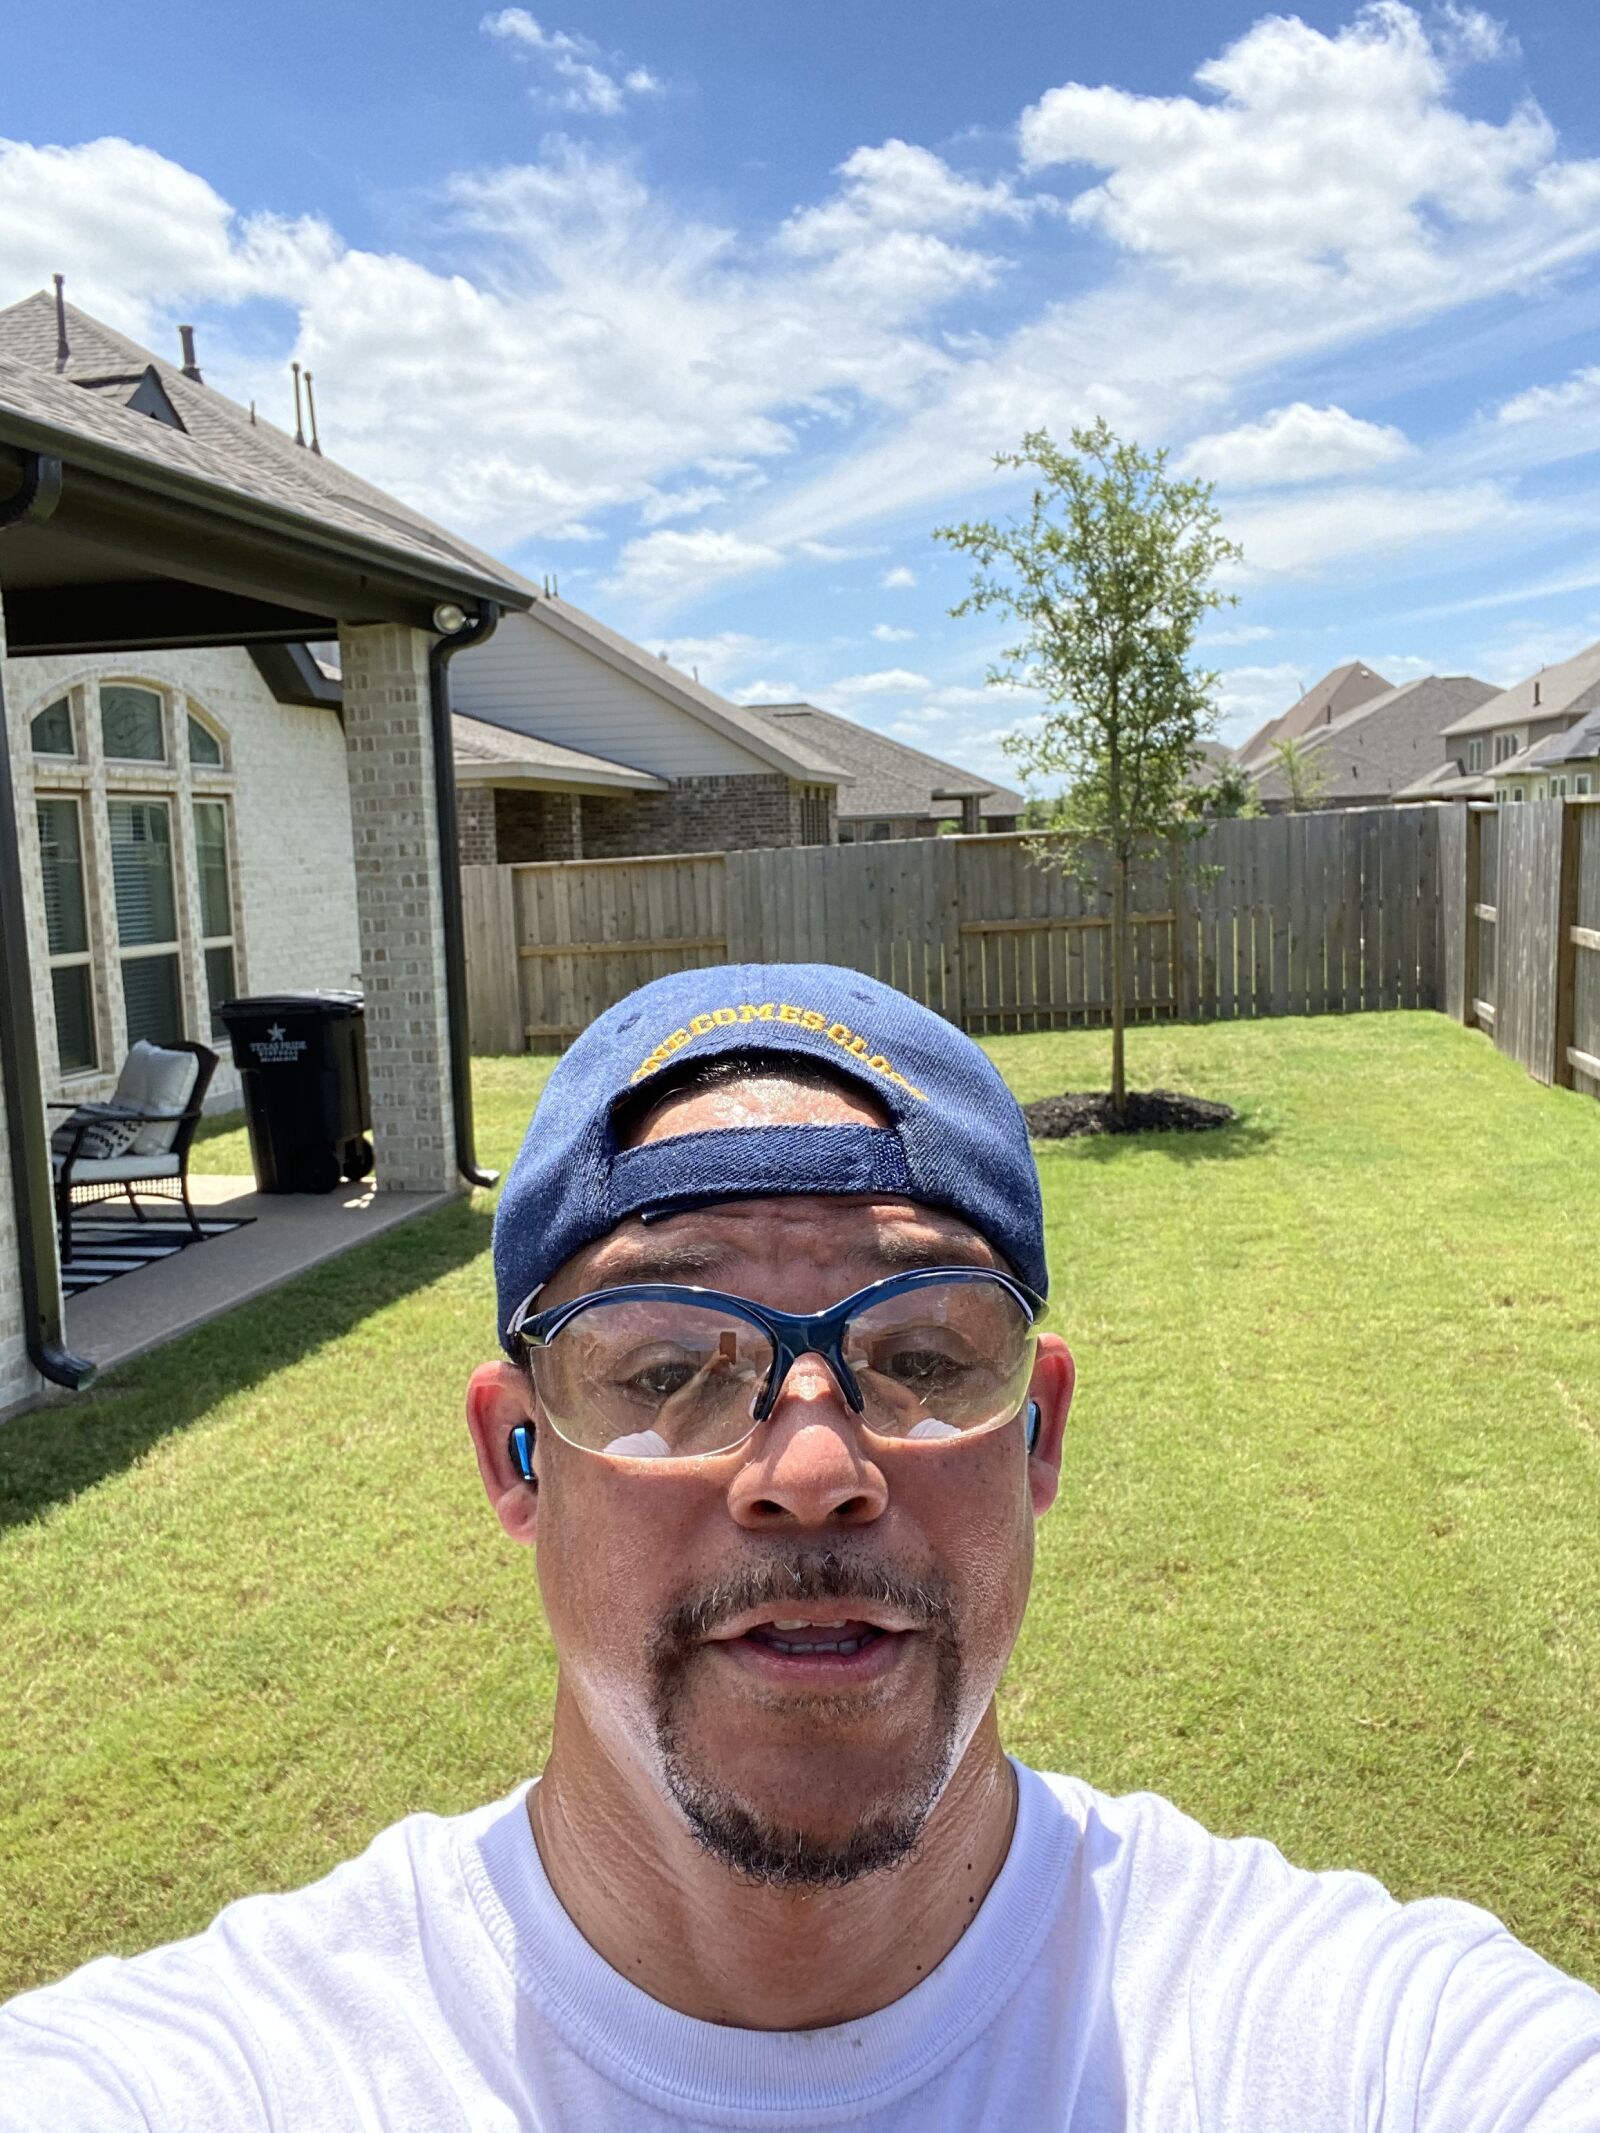 Apple iPhone 11 + iPhone 11 front camera 2.71mm f/2.2 sample photo. Yard work, chores, cut photography